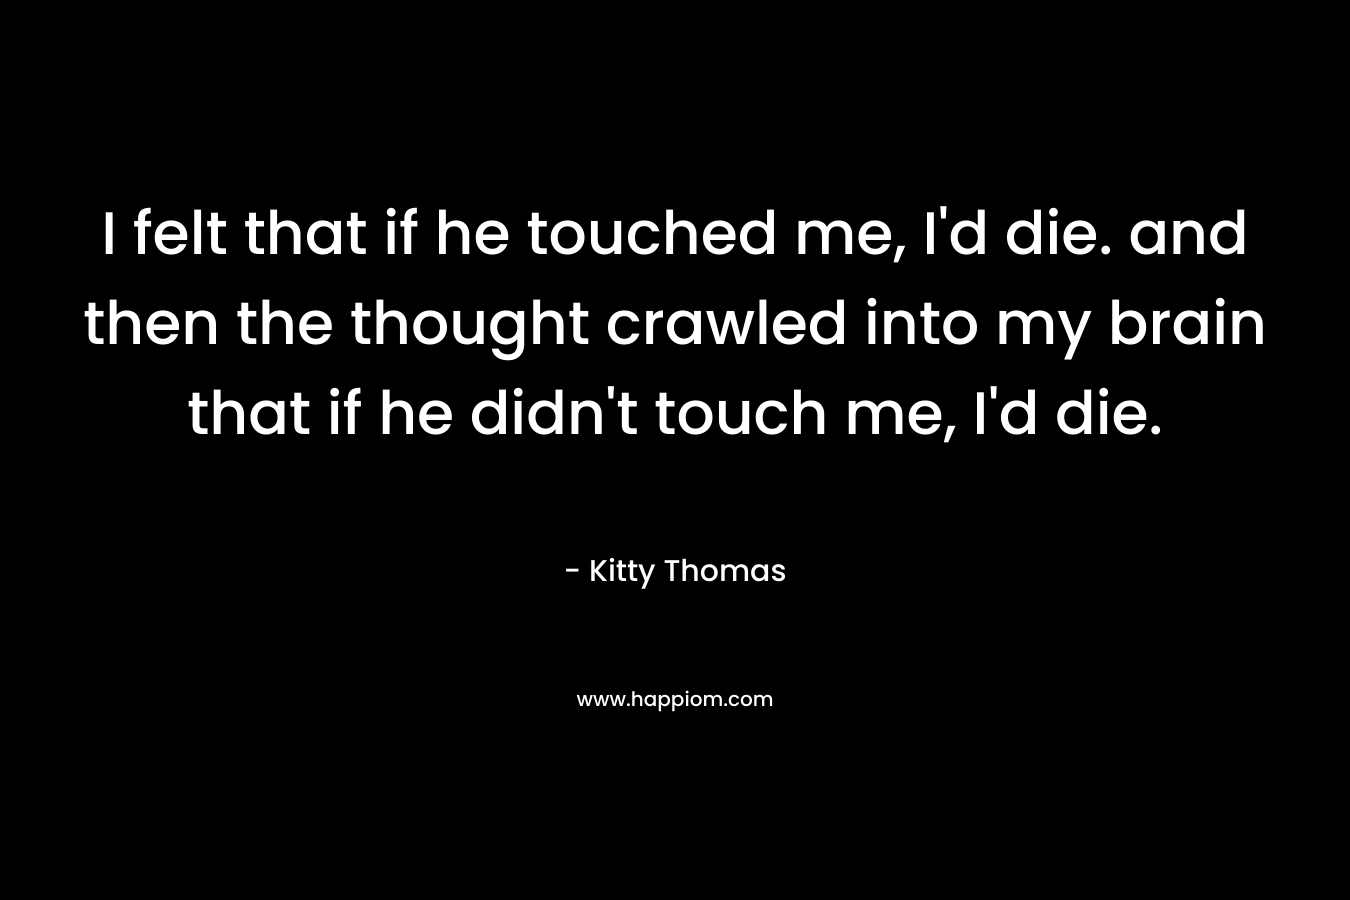 I felt that if he touched me, I’d die. and then the thought crawled into my brain that if he didn’t touch me, I’d die. – Kitty Thomas